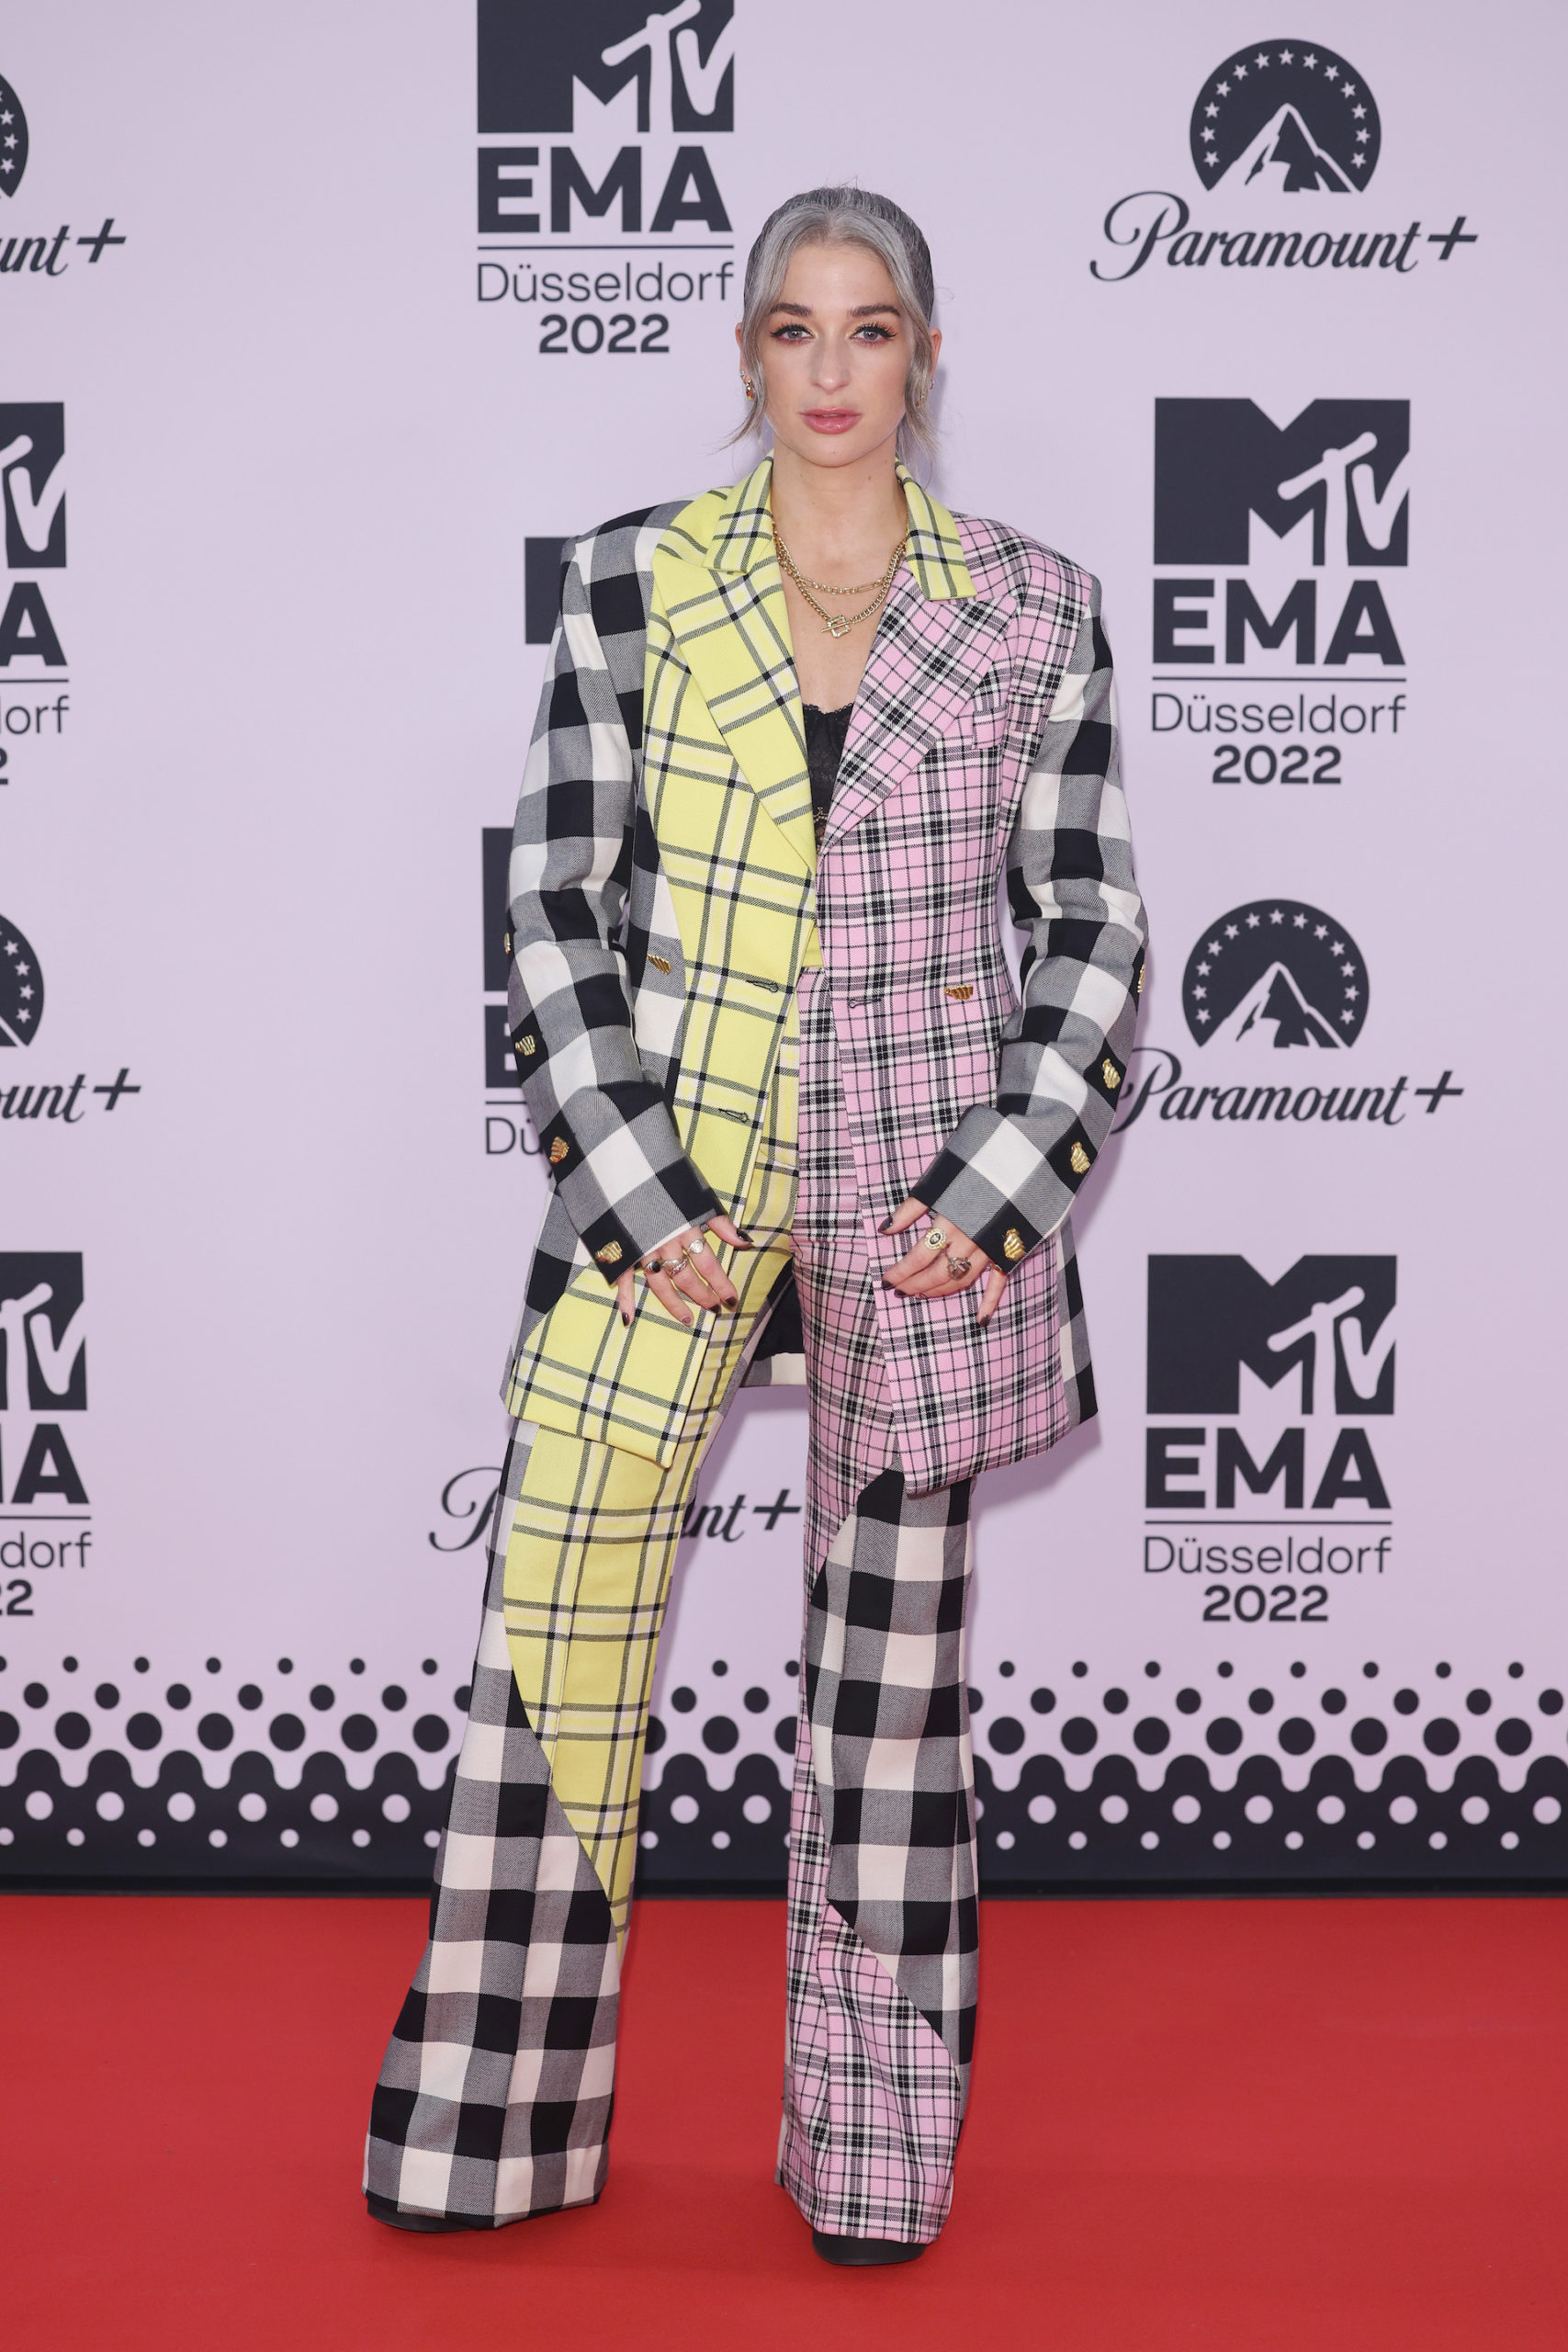  DUESSELDORF, GERMANY - NOVEMBER 13: Harriet Rose attends the red carpet during the MTV Europe Music Awards 2022 held at PSD Bank Dome on November 13, 2022 in Duesseldorf, Germany. (Photo by Daniele Venturelli/WireImage)